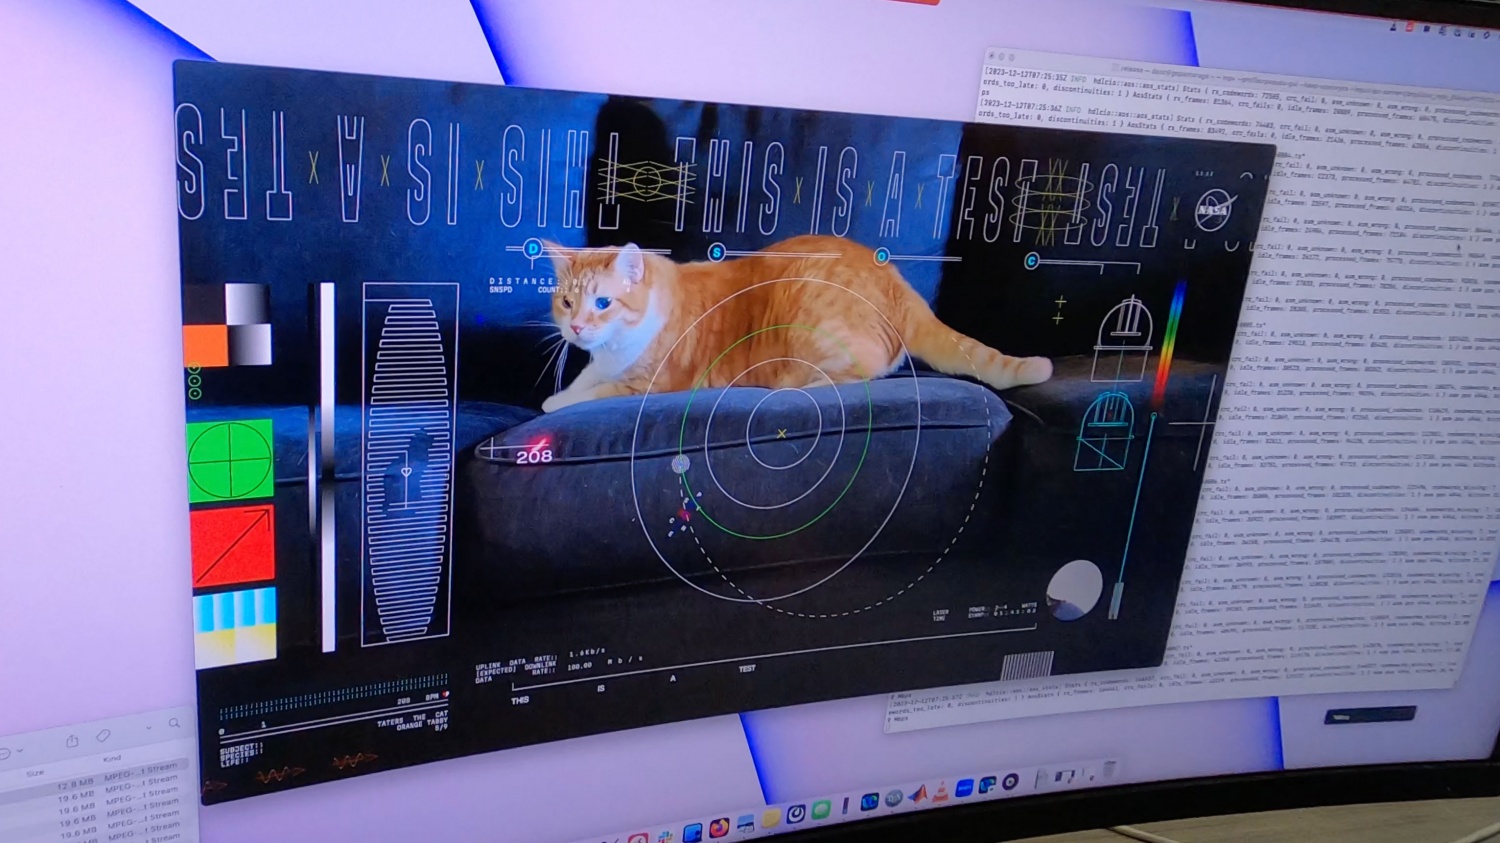 NASA Streams First Video From Deep Space via Laser; Short Clip Features Cat Named Taters